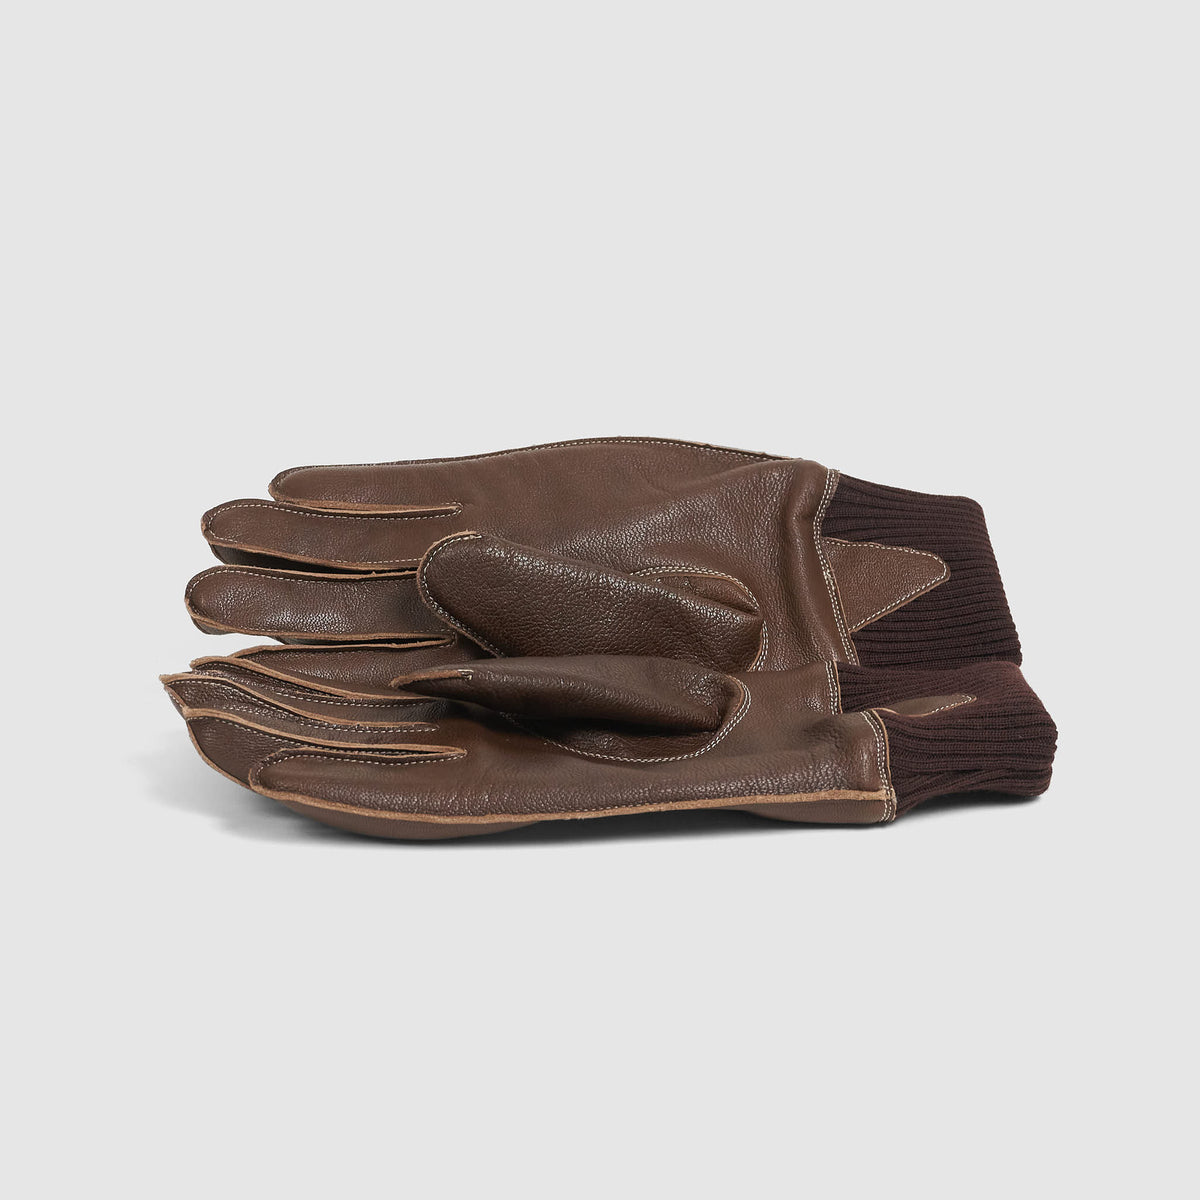 Old Crow Speed Shop by Glad Hand &amp; Co. Crow Wing Glove